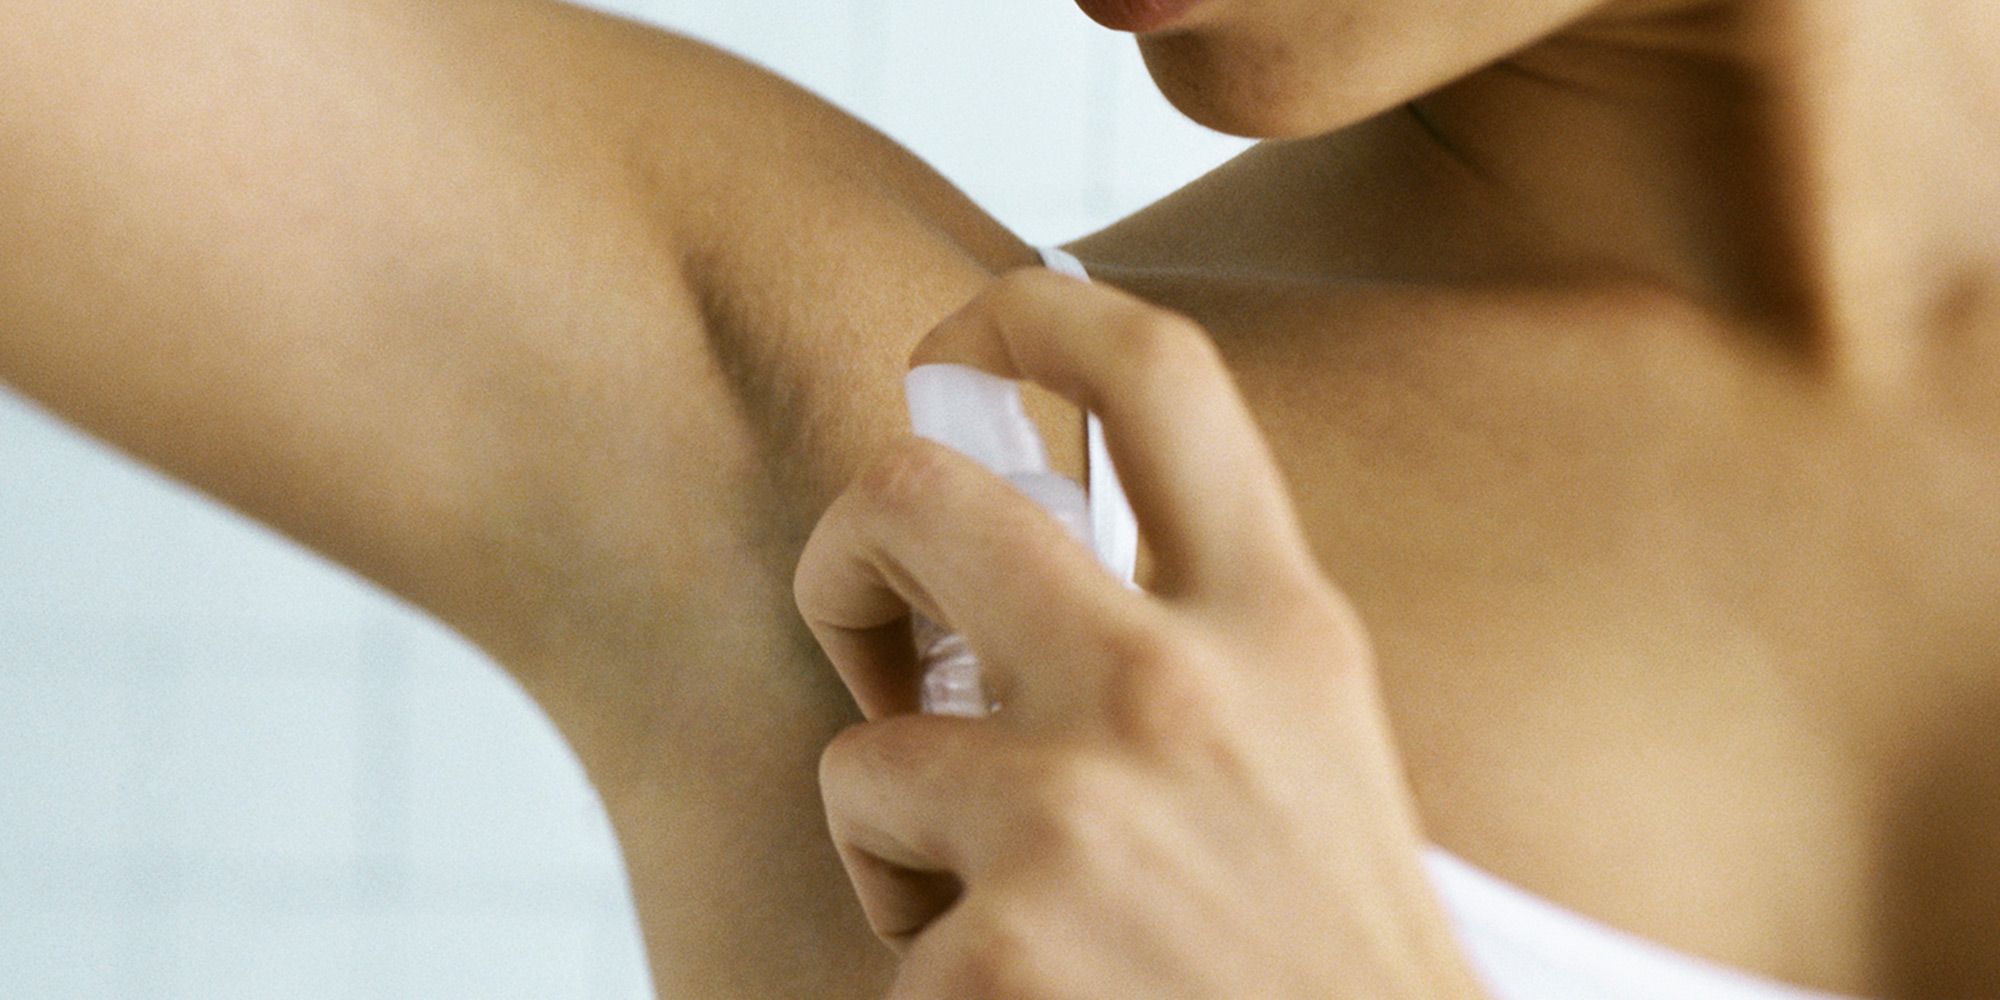 Why Should You Switch To A Mineral Deodorant?